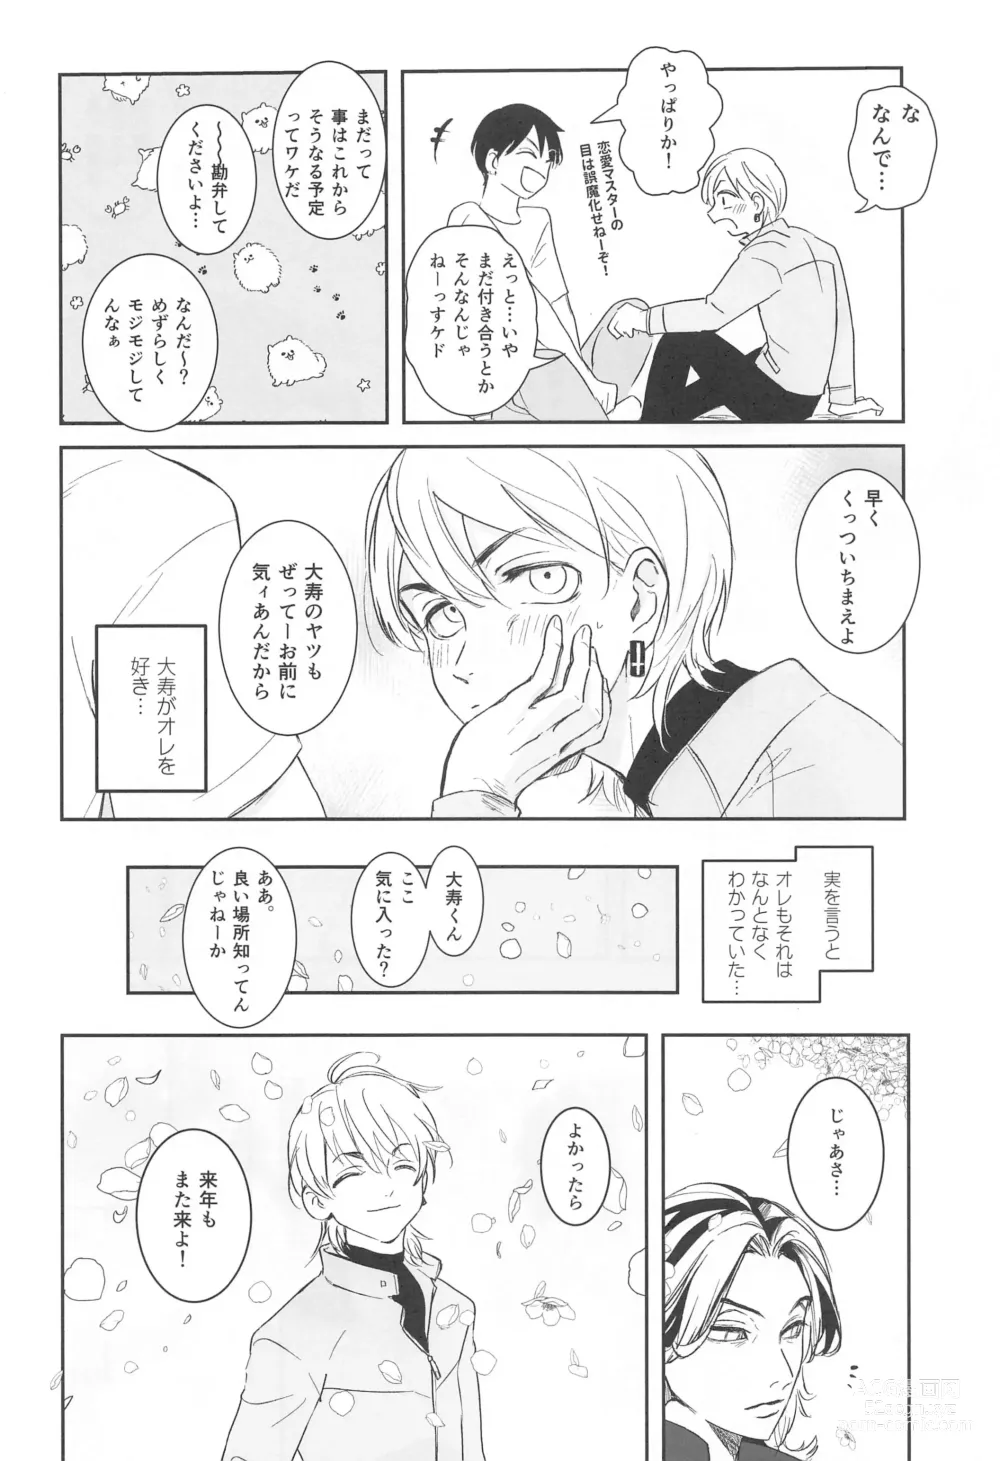 Page 5 of doujinshi Houkago Lesson